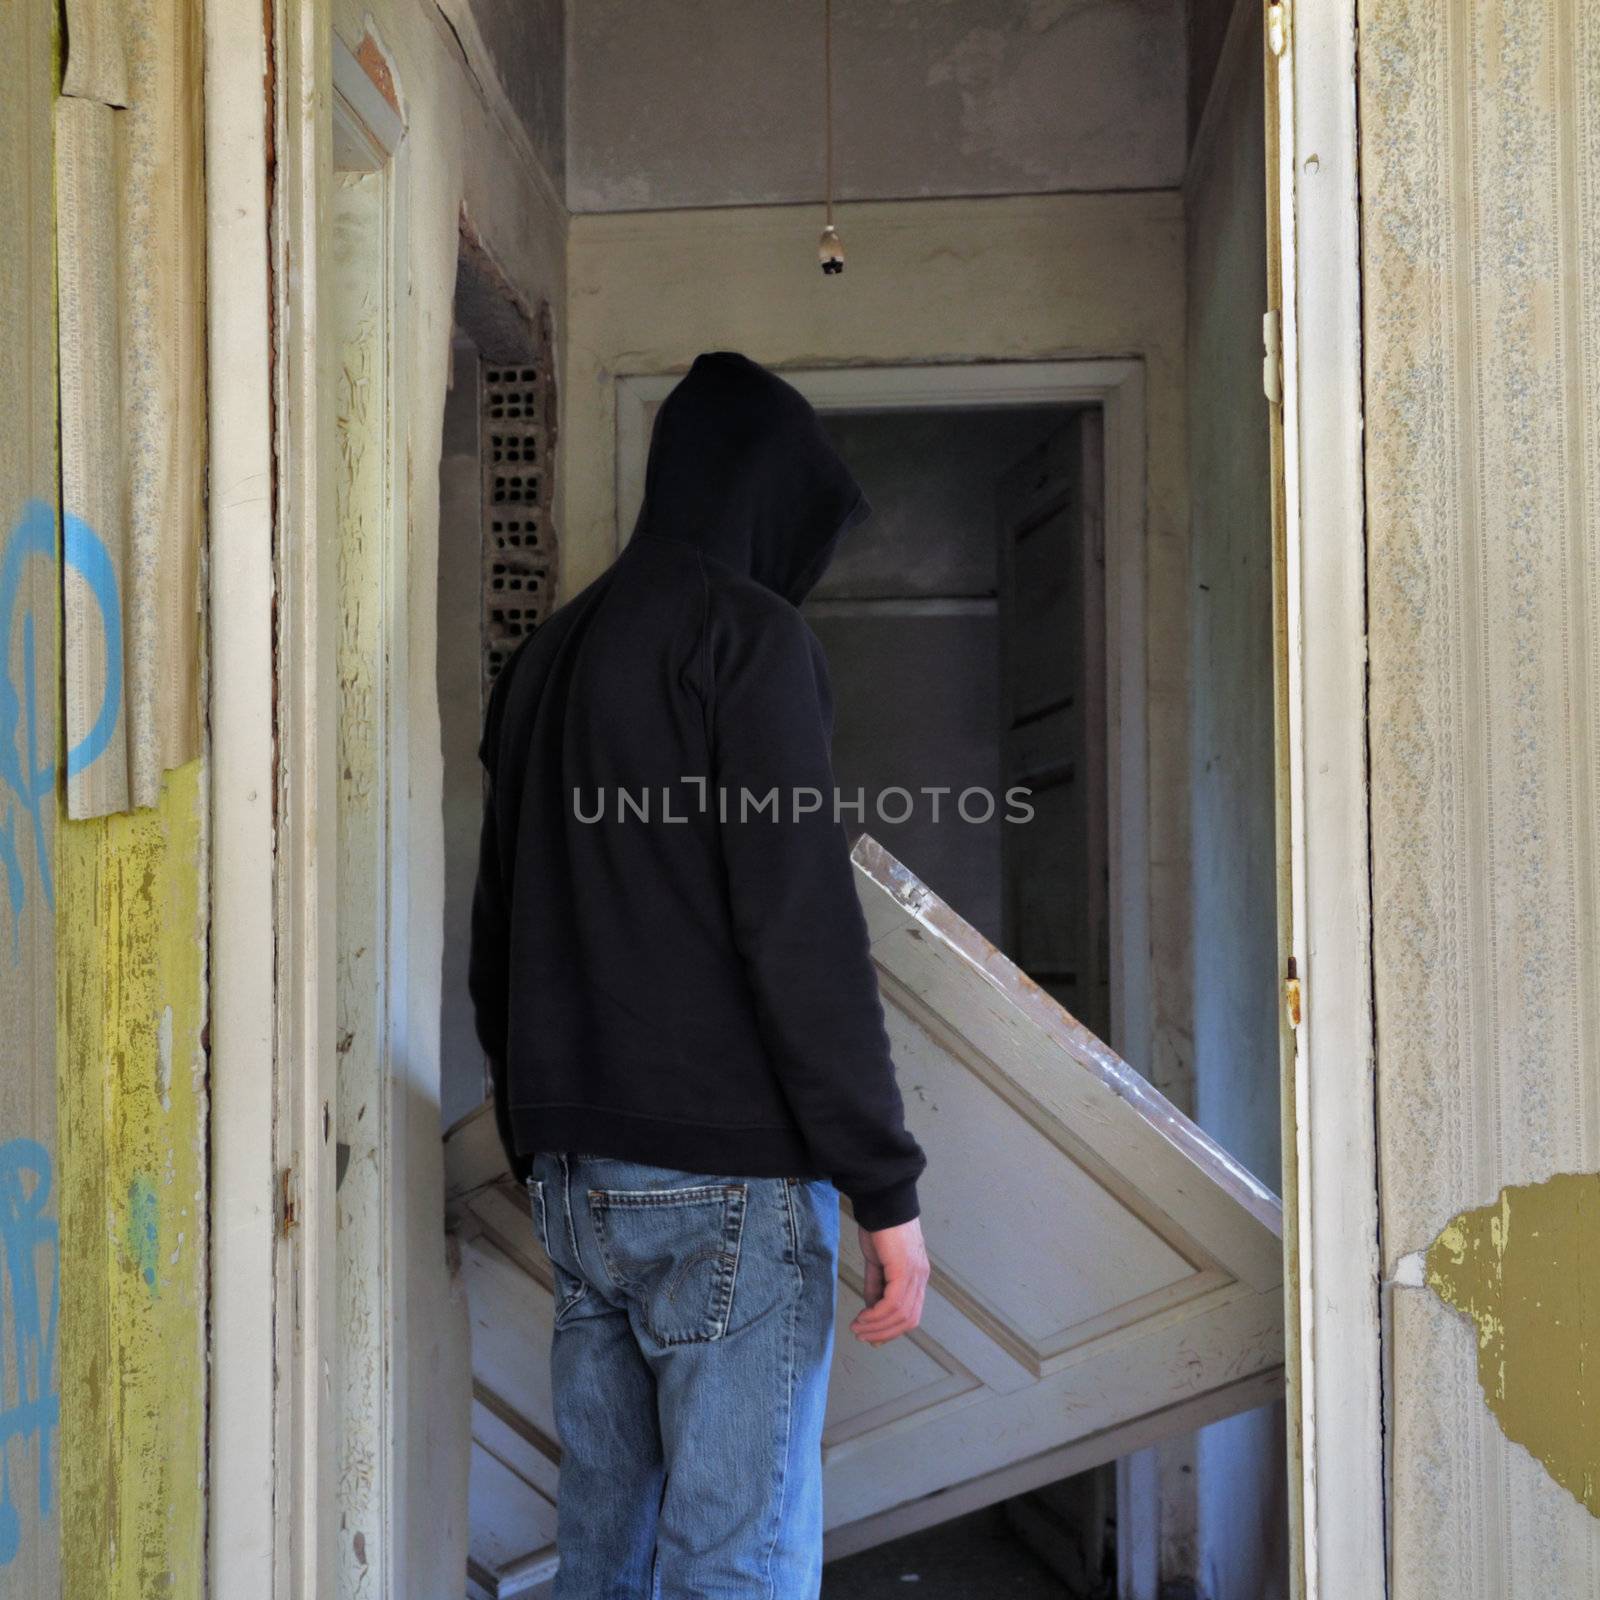 Unhinged door in the doorway of an abandoned house and hooded figure.